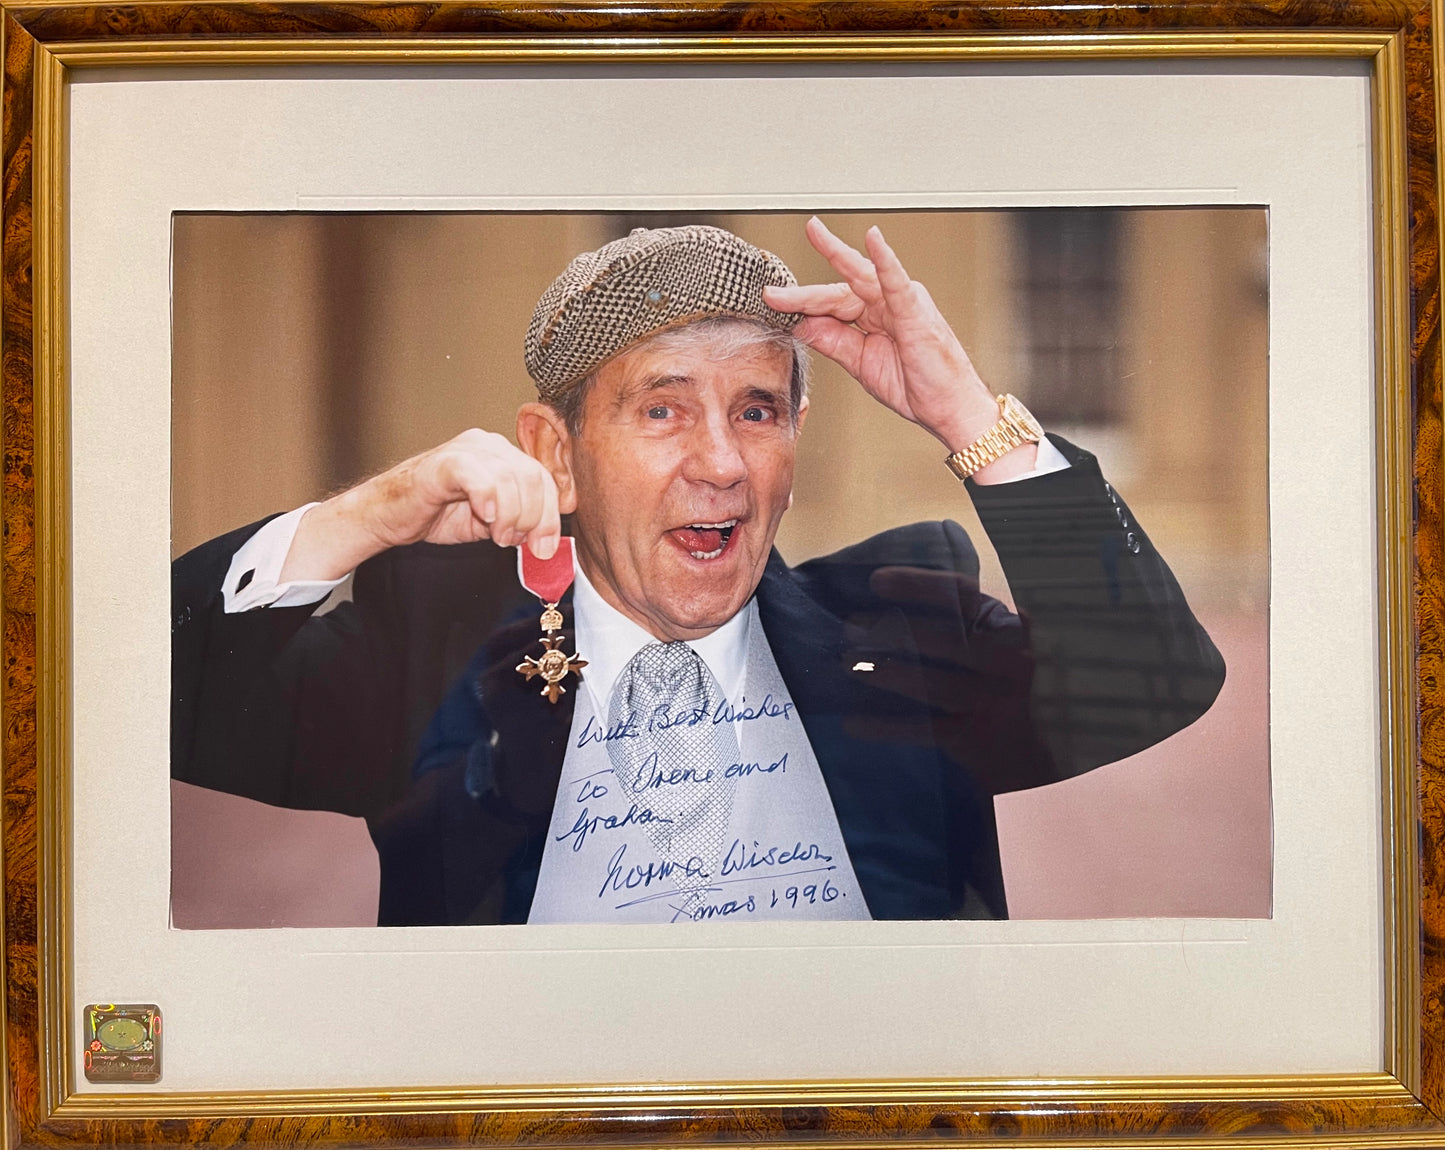 SIR NORMAN WISDOM HAND SIGNED PHOTO WITH COA 15 x 12 INCH